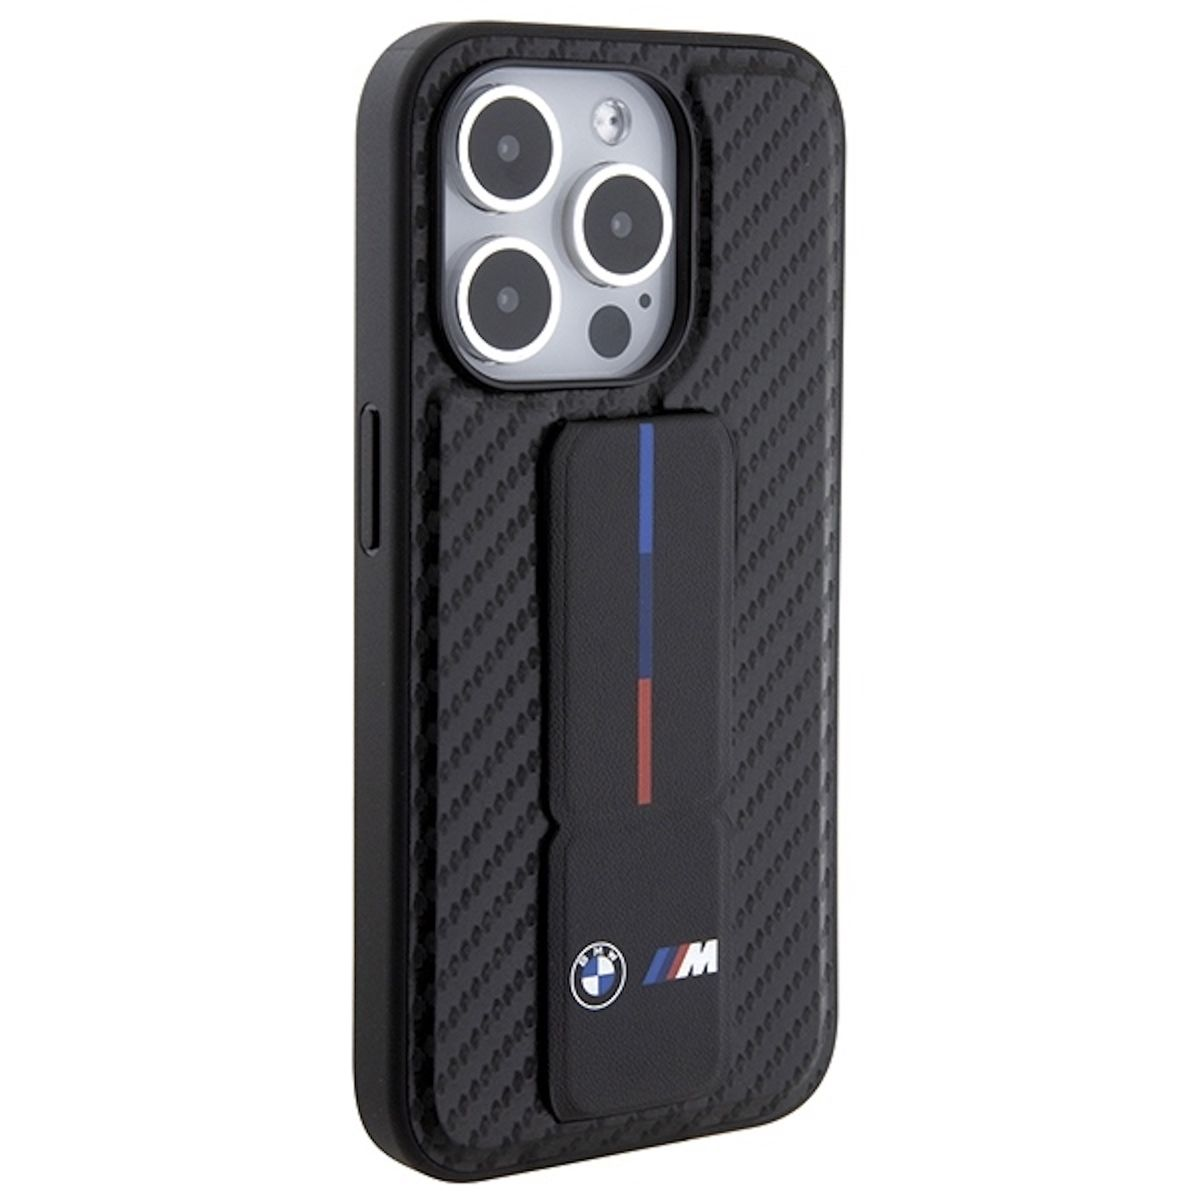 Apple, Schwarz Pro iPhone Hardcase BMW Stand, mit Backcover, Carbon 15 Max,